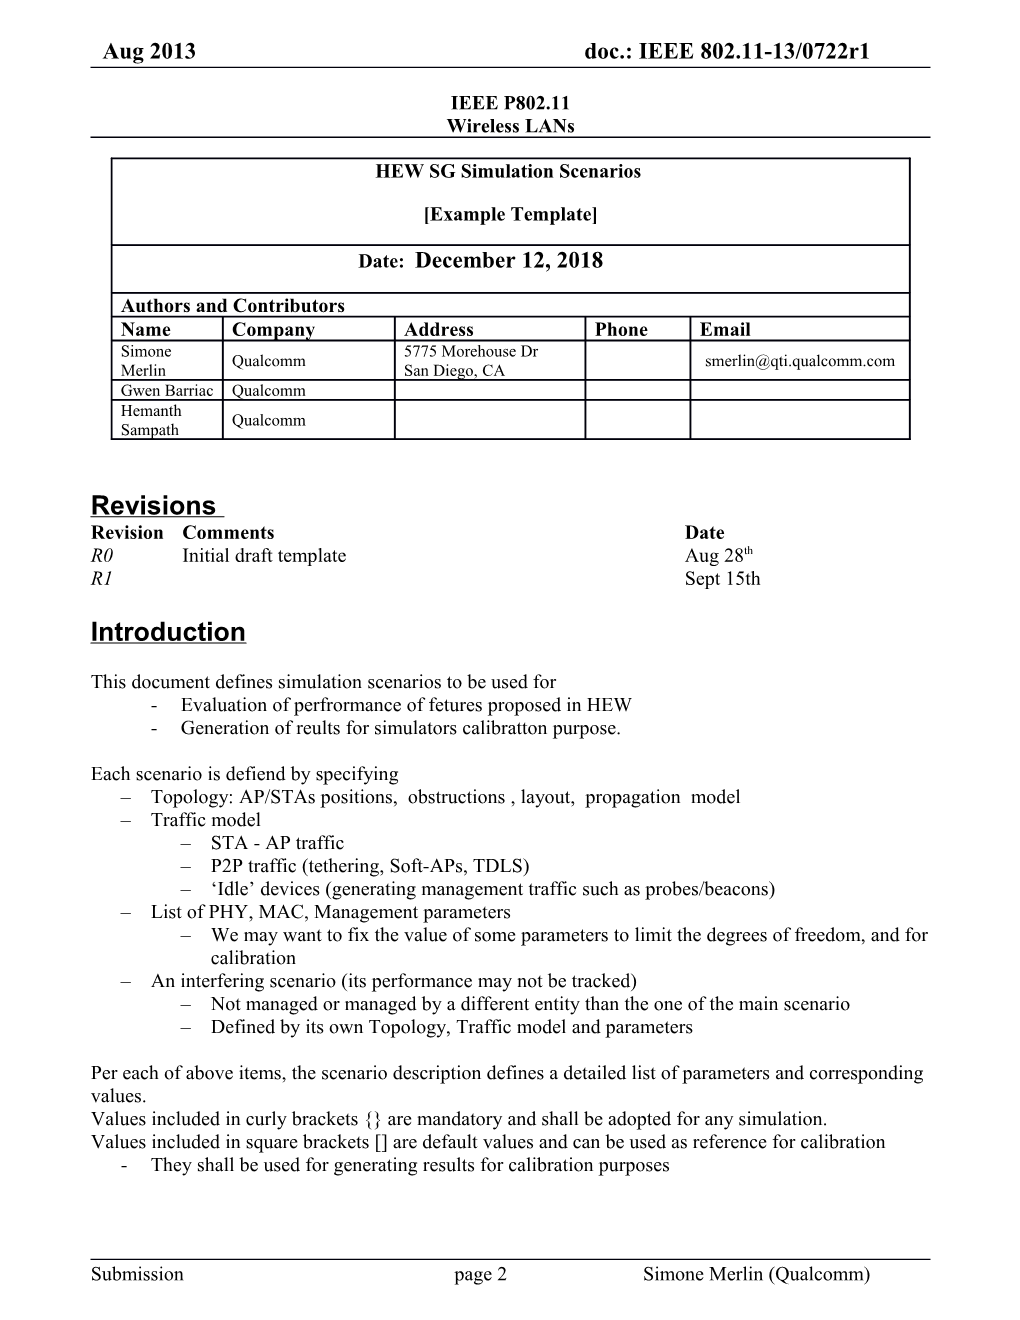 This Document Defines Simulation Scenarios to Be Used For